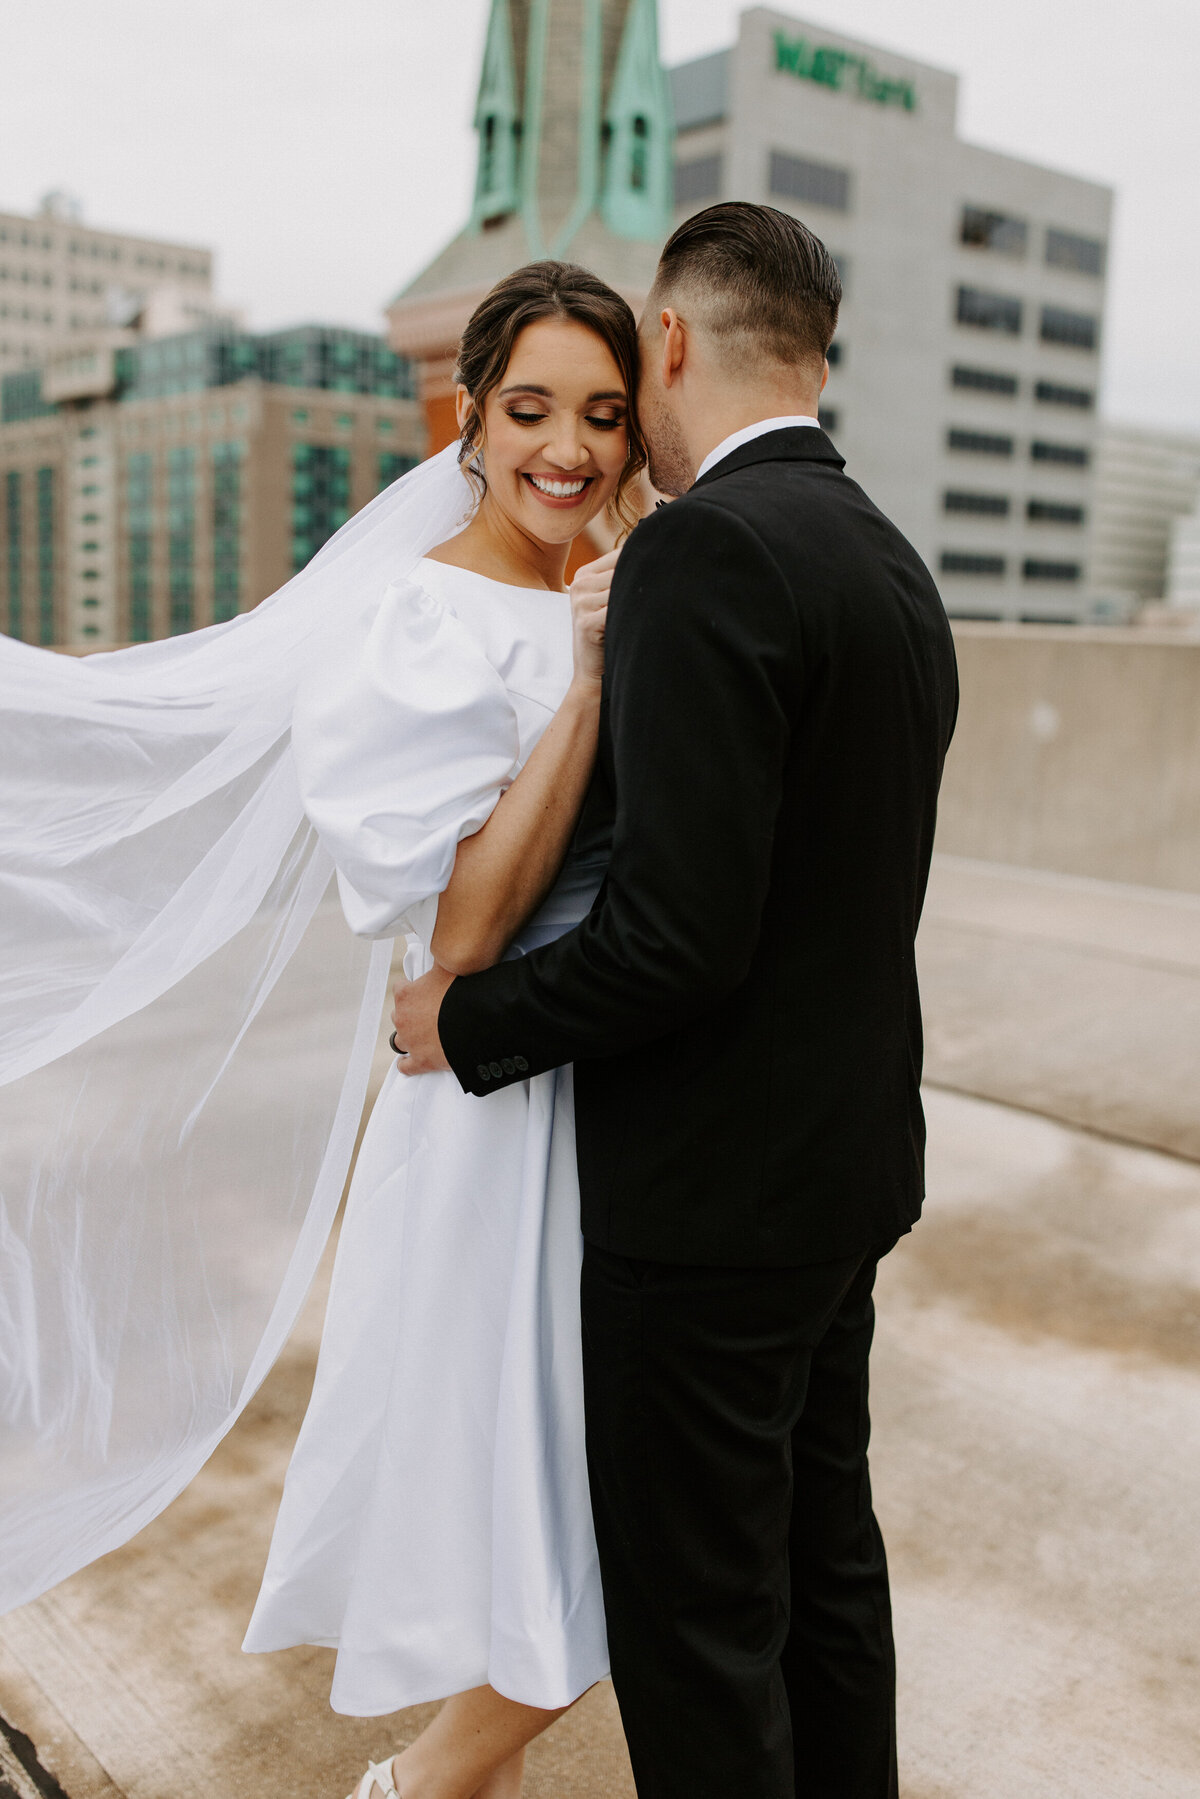 wedding couple hugging each other while on a city rooftop